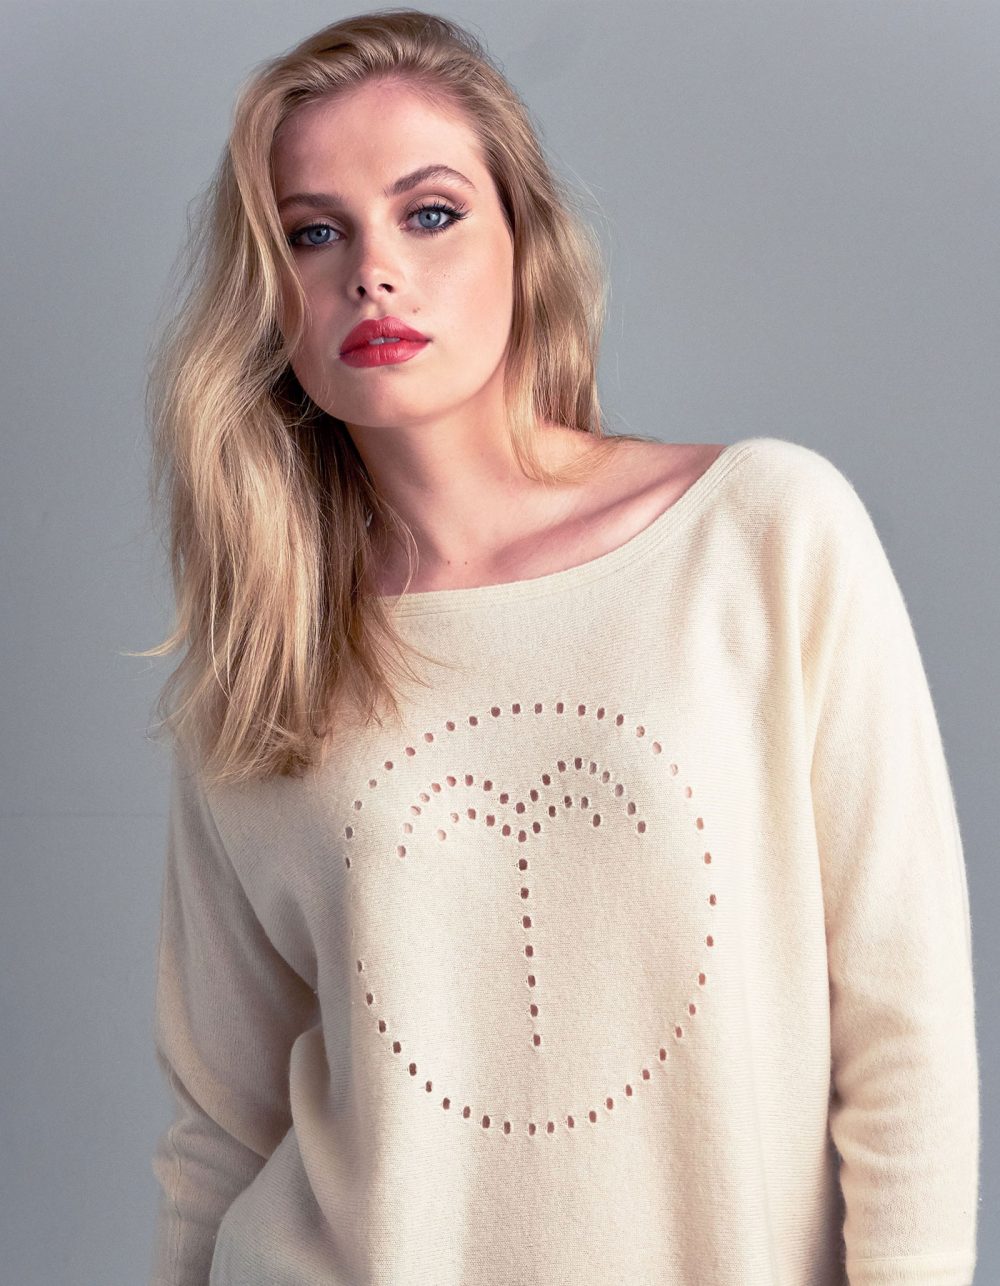 Studio photo of a model wearing a cashmere palm jumper in cream, part of the malin darlin designer cashmere collection.